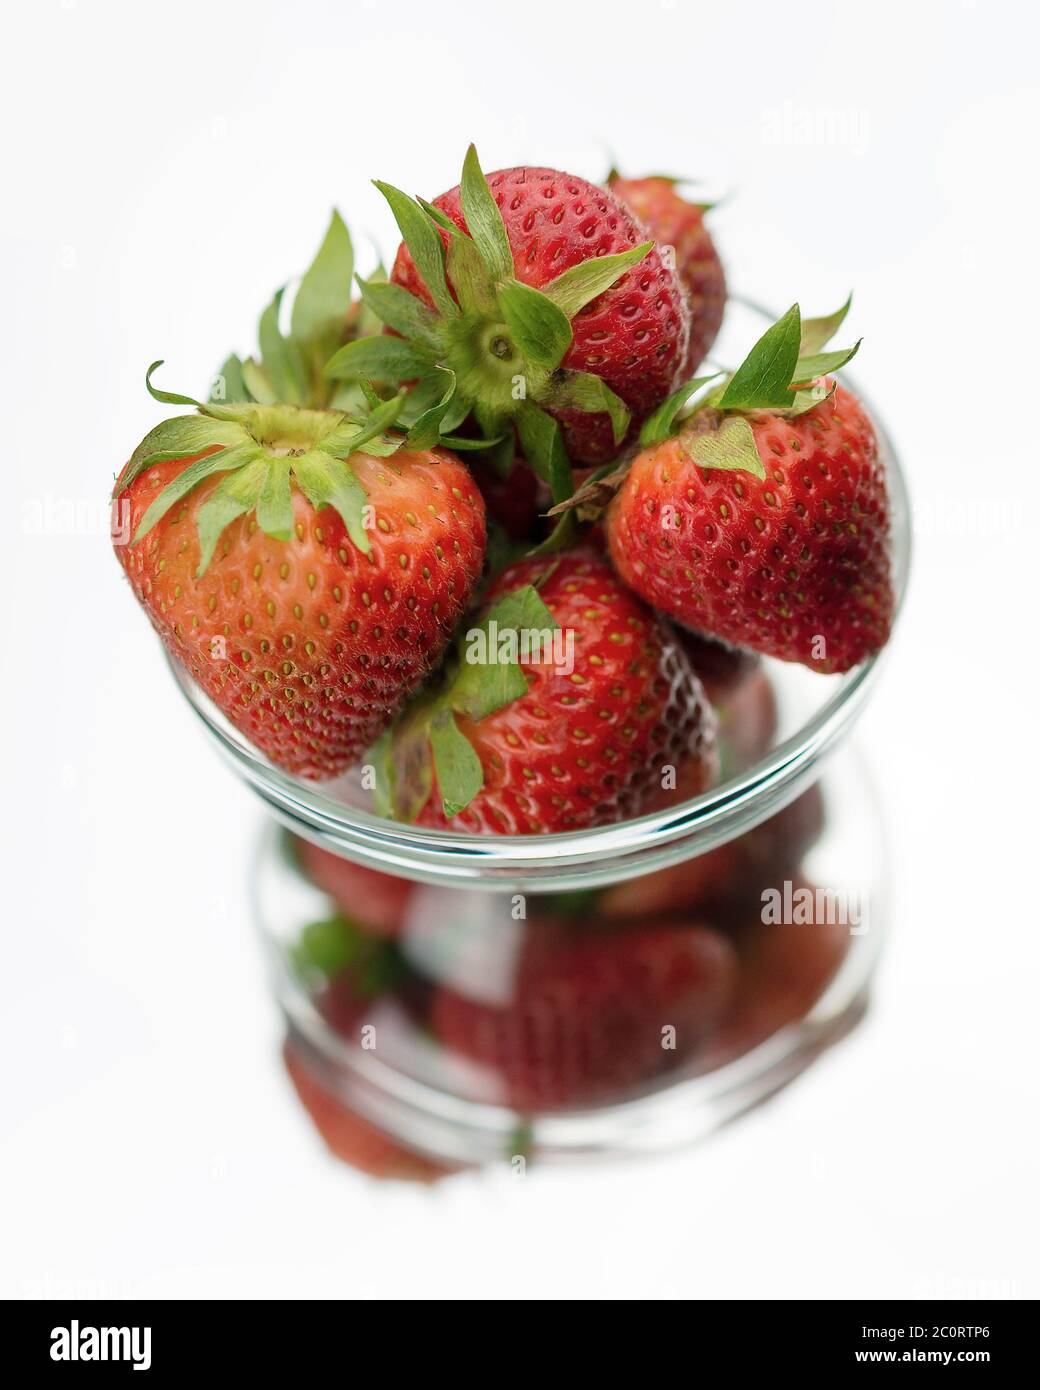 A clear glass bowl of red strawberries with reflection on a mirror.  White background. Stock Photo